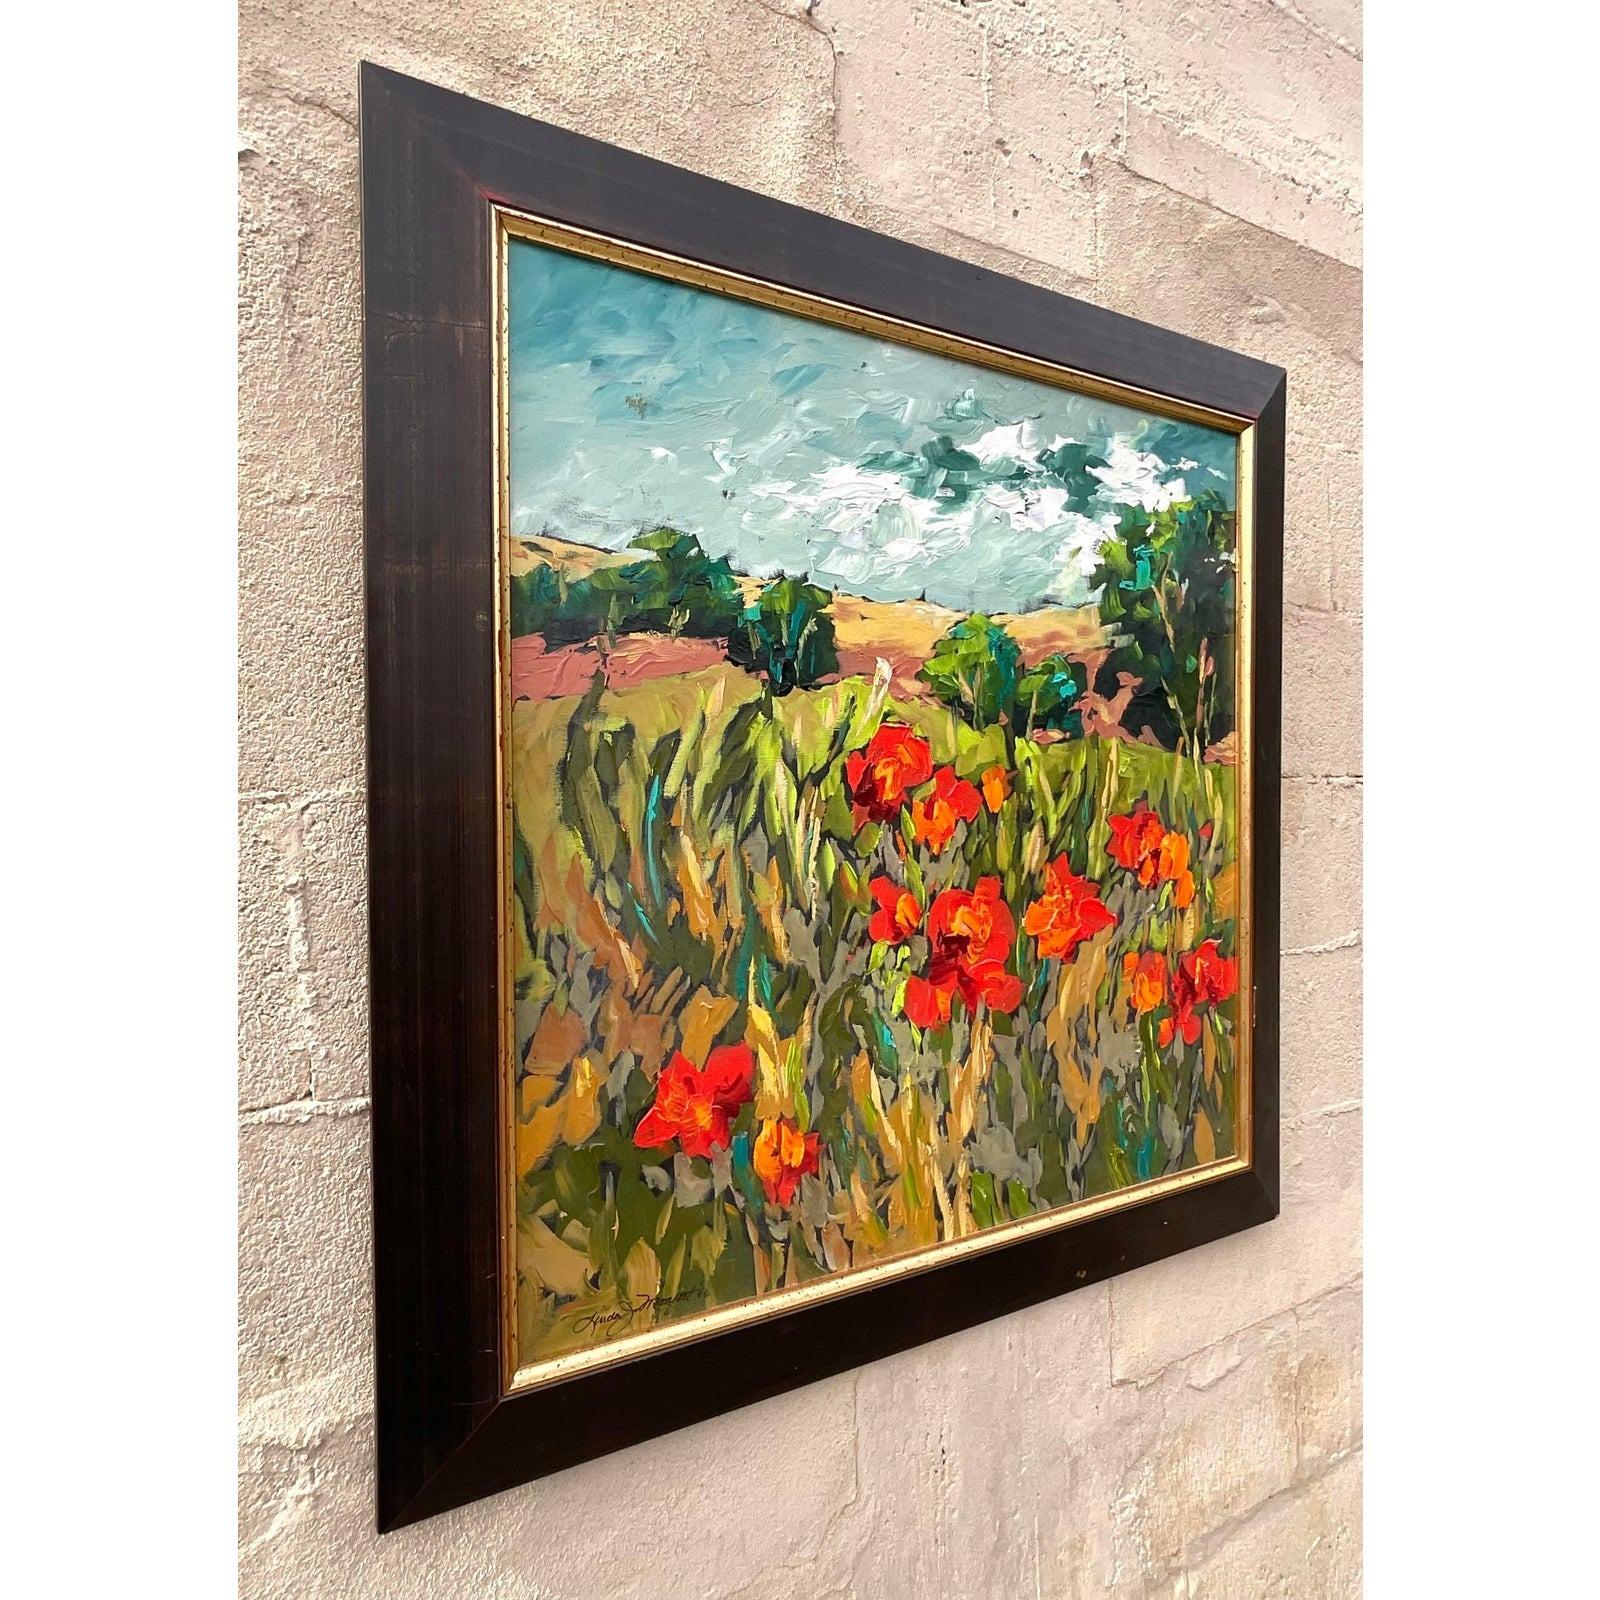 A fabulous vintage Boho original oil painting. A chic pastoral landscape scene with gorgeous color. Signed by the artist. Acquired from a Palm Beach estate.